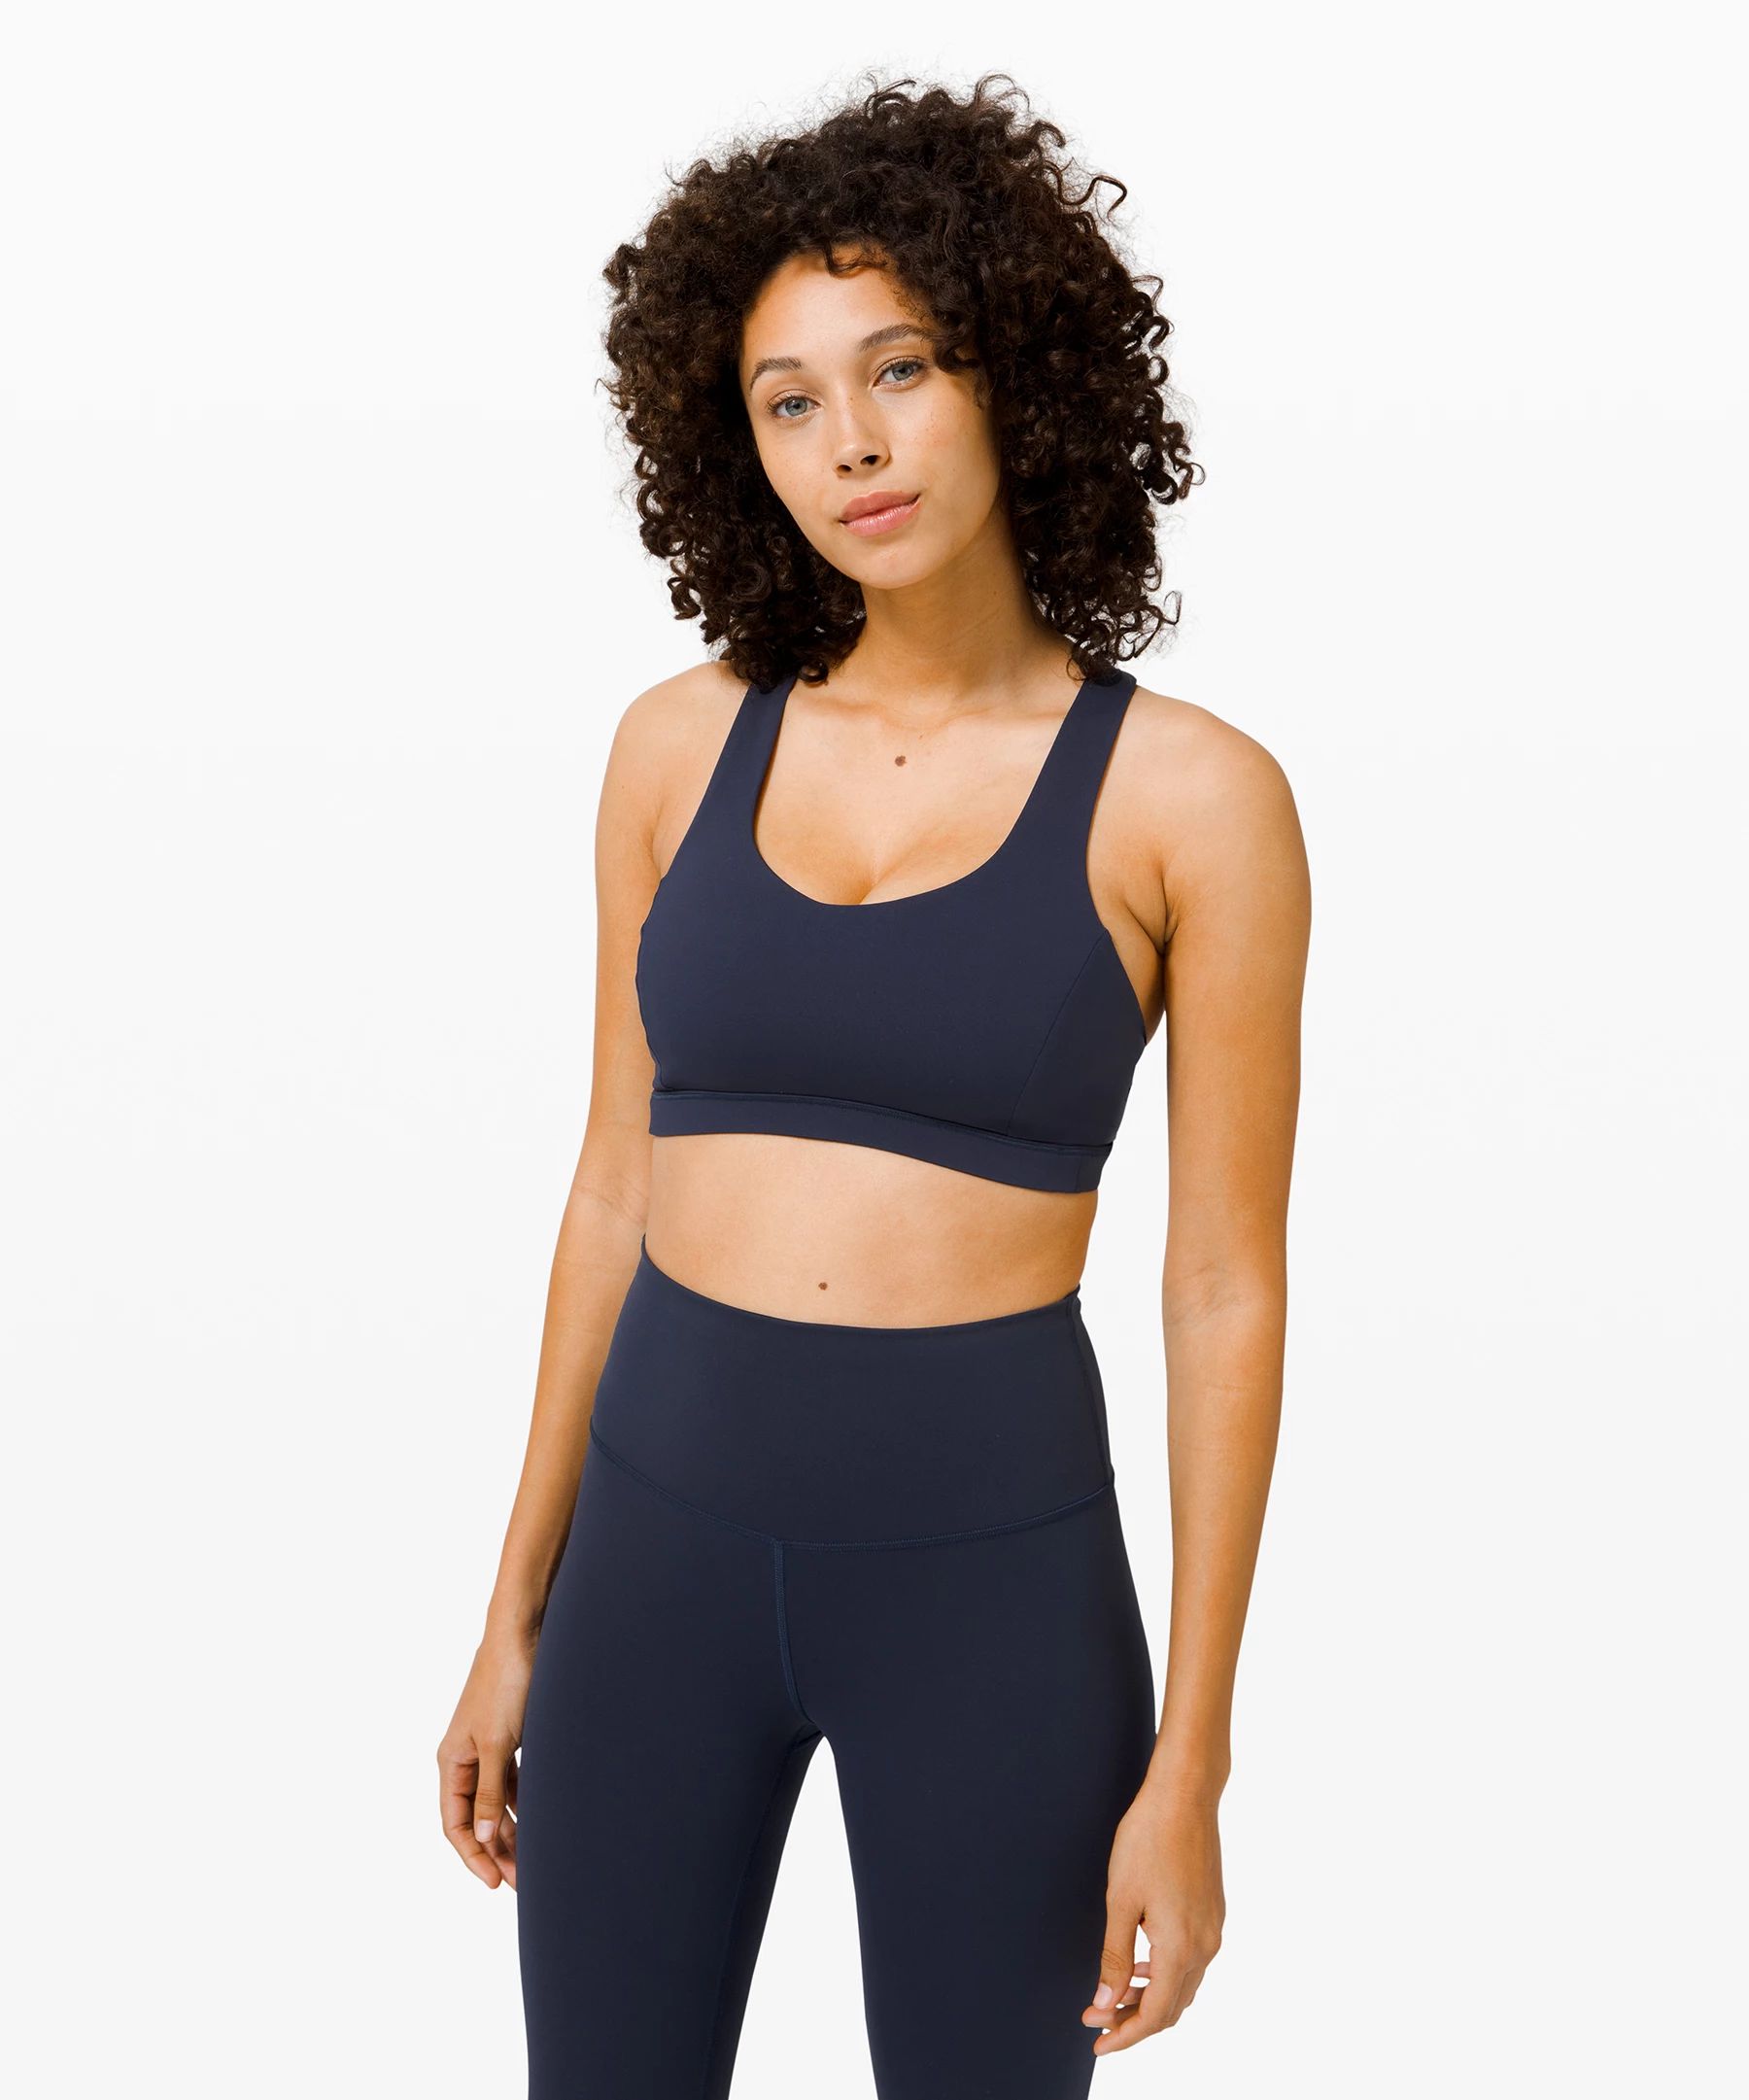 Free To Be Serene BraLight Support, C/D Cup | Lululemon (US)